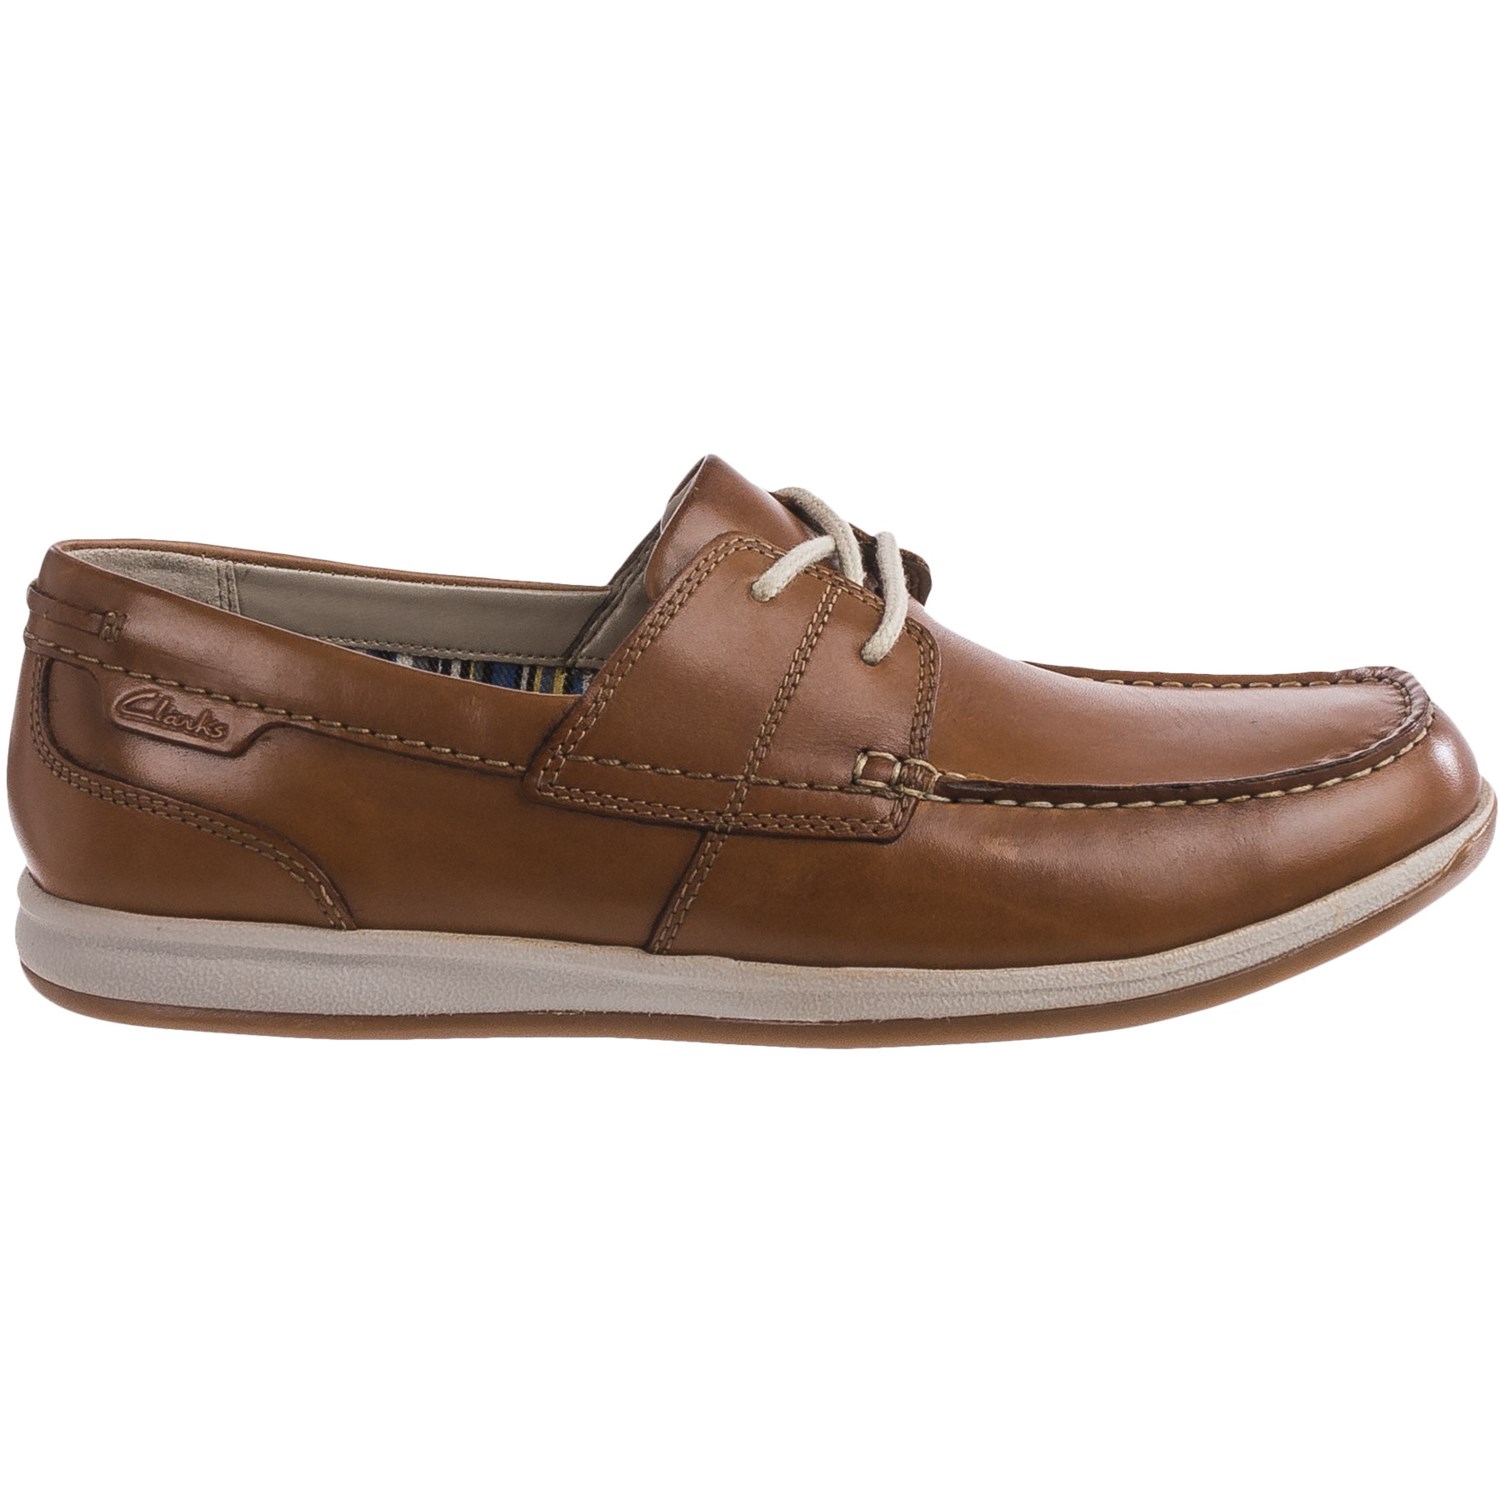 Clarks Fallston Style Boat Shoes (For Men) Save 44